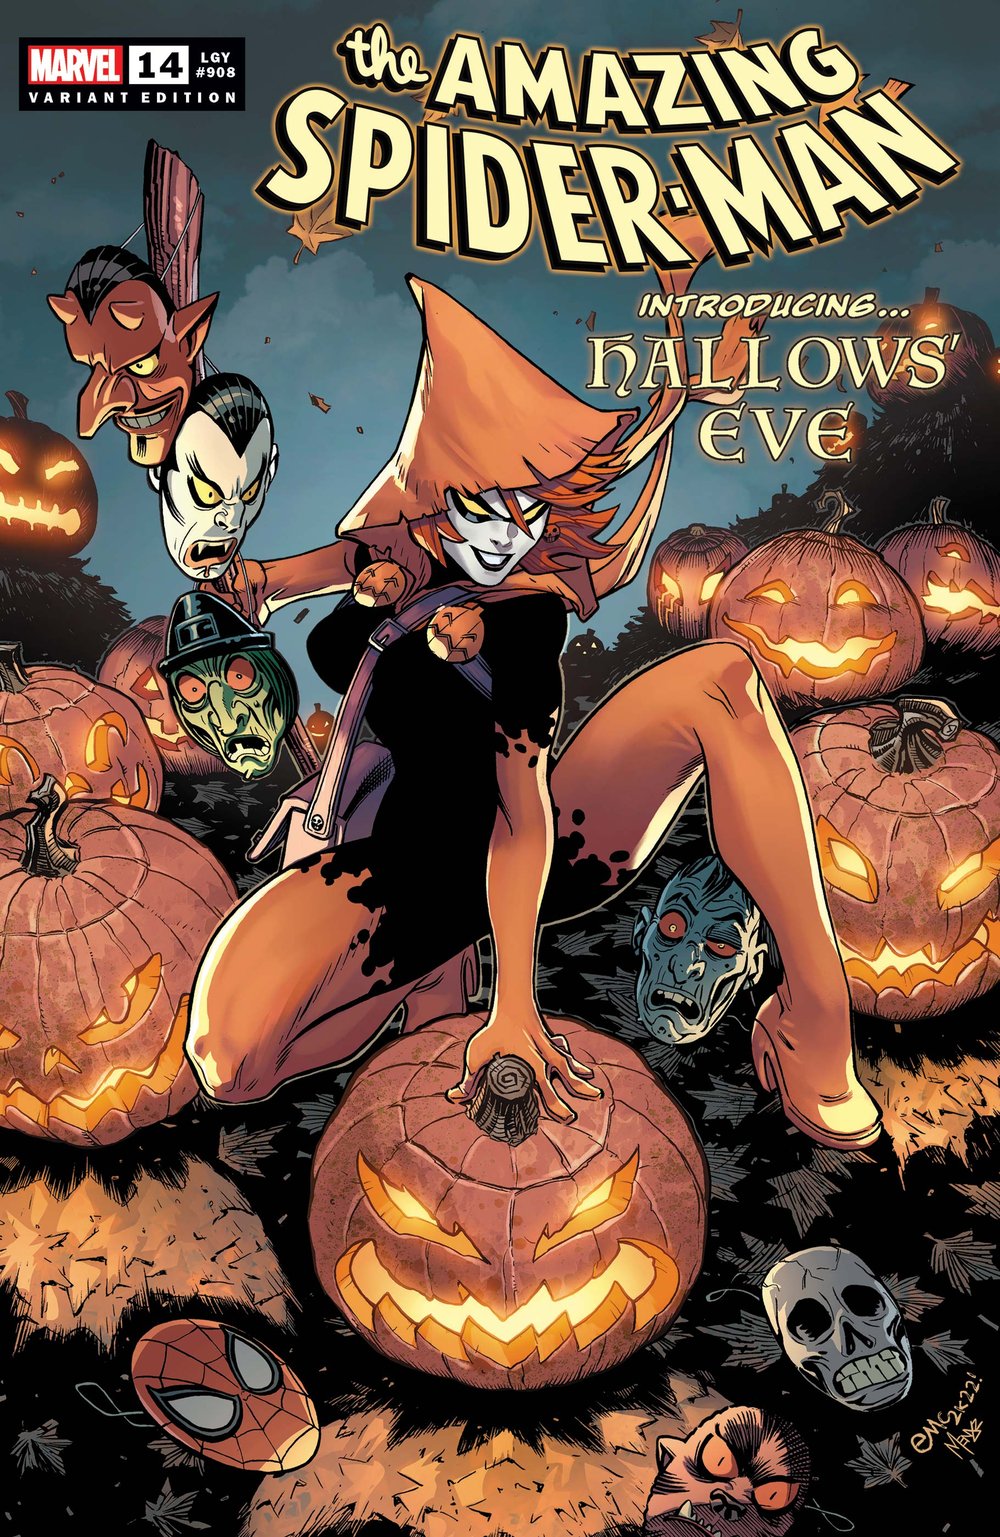 Amazing Spider-Man 14 cover 1st Hallows Eve!